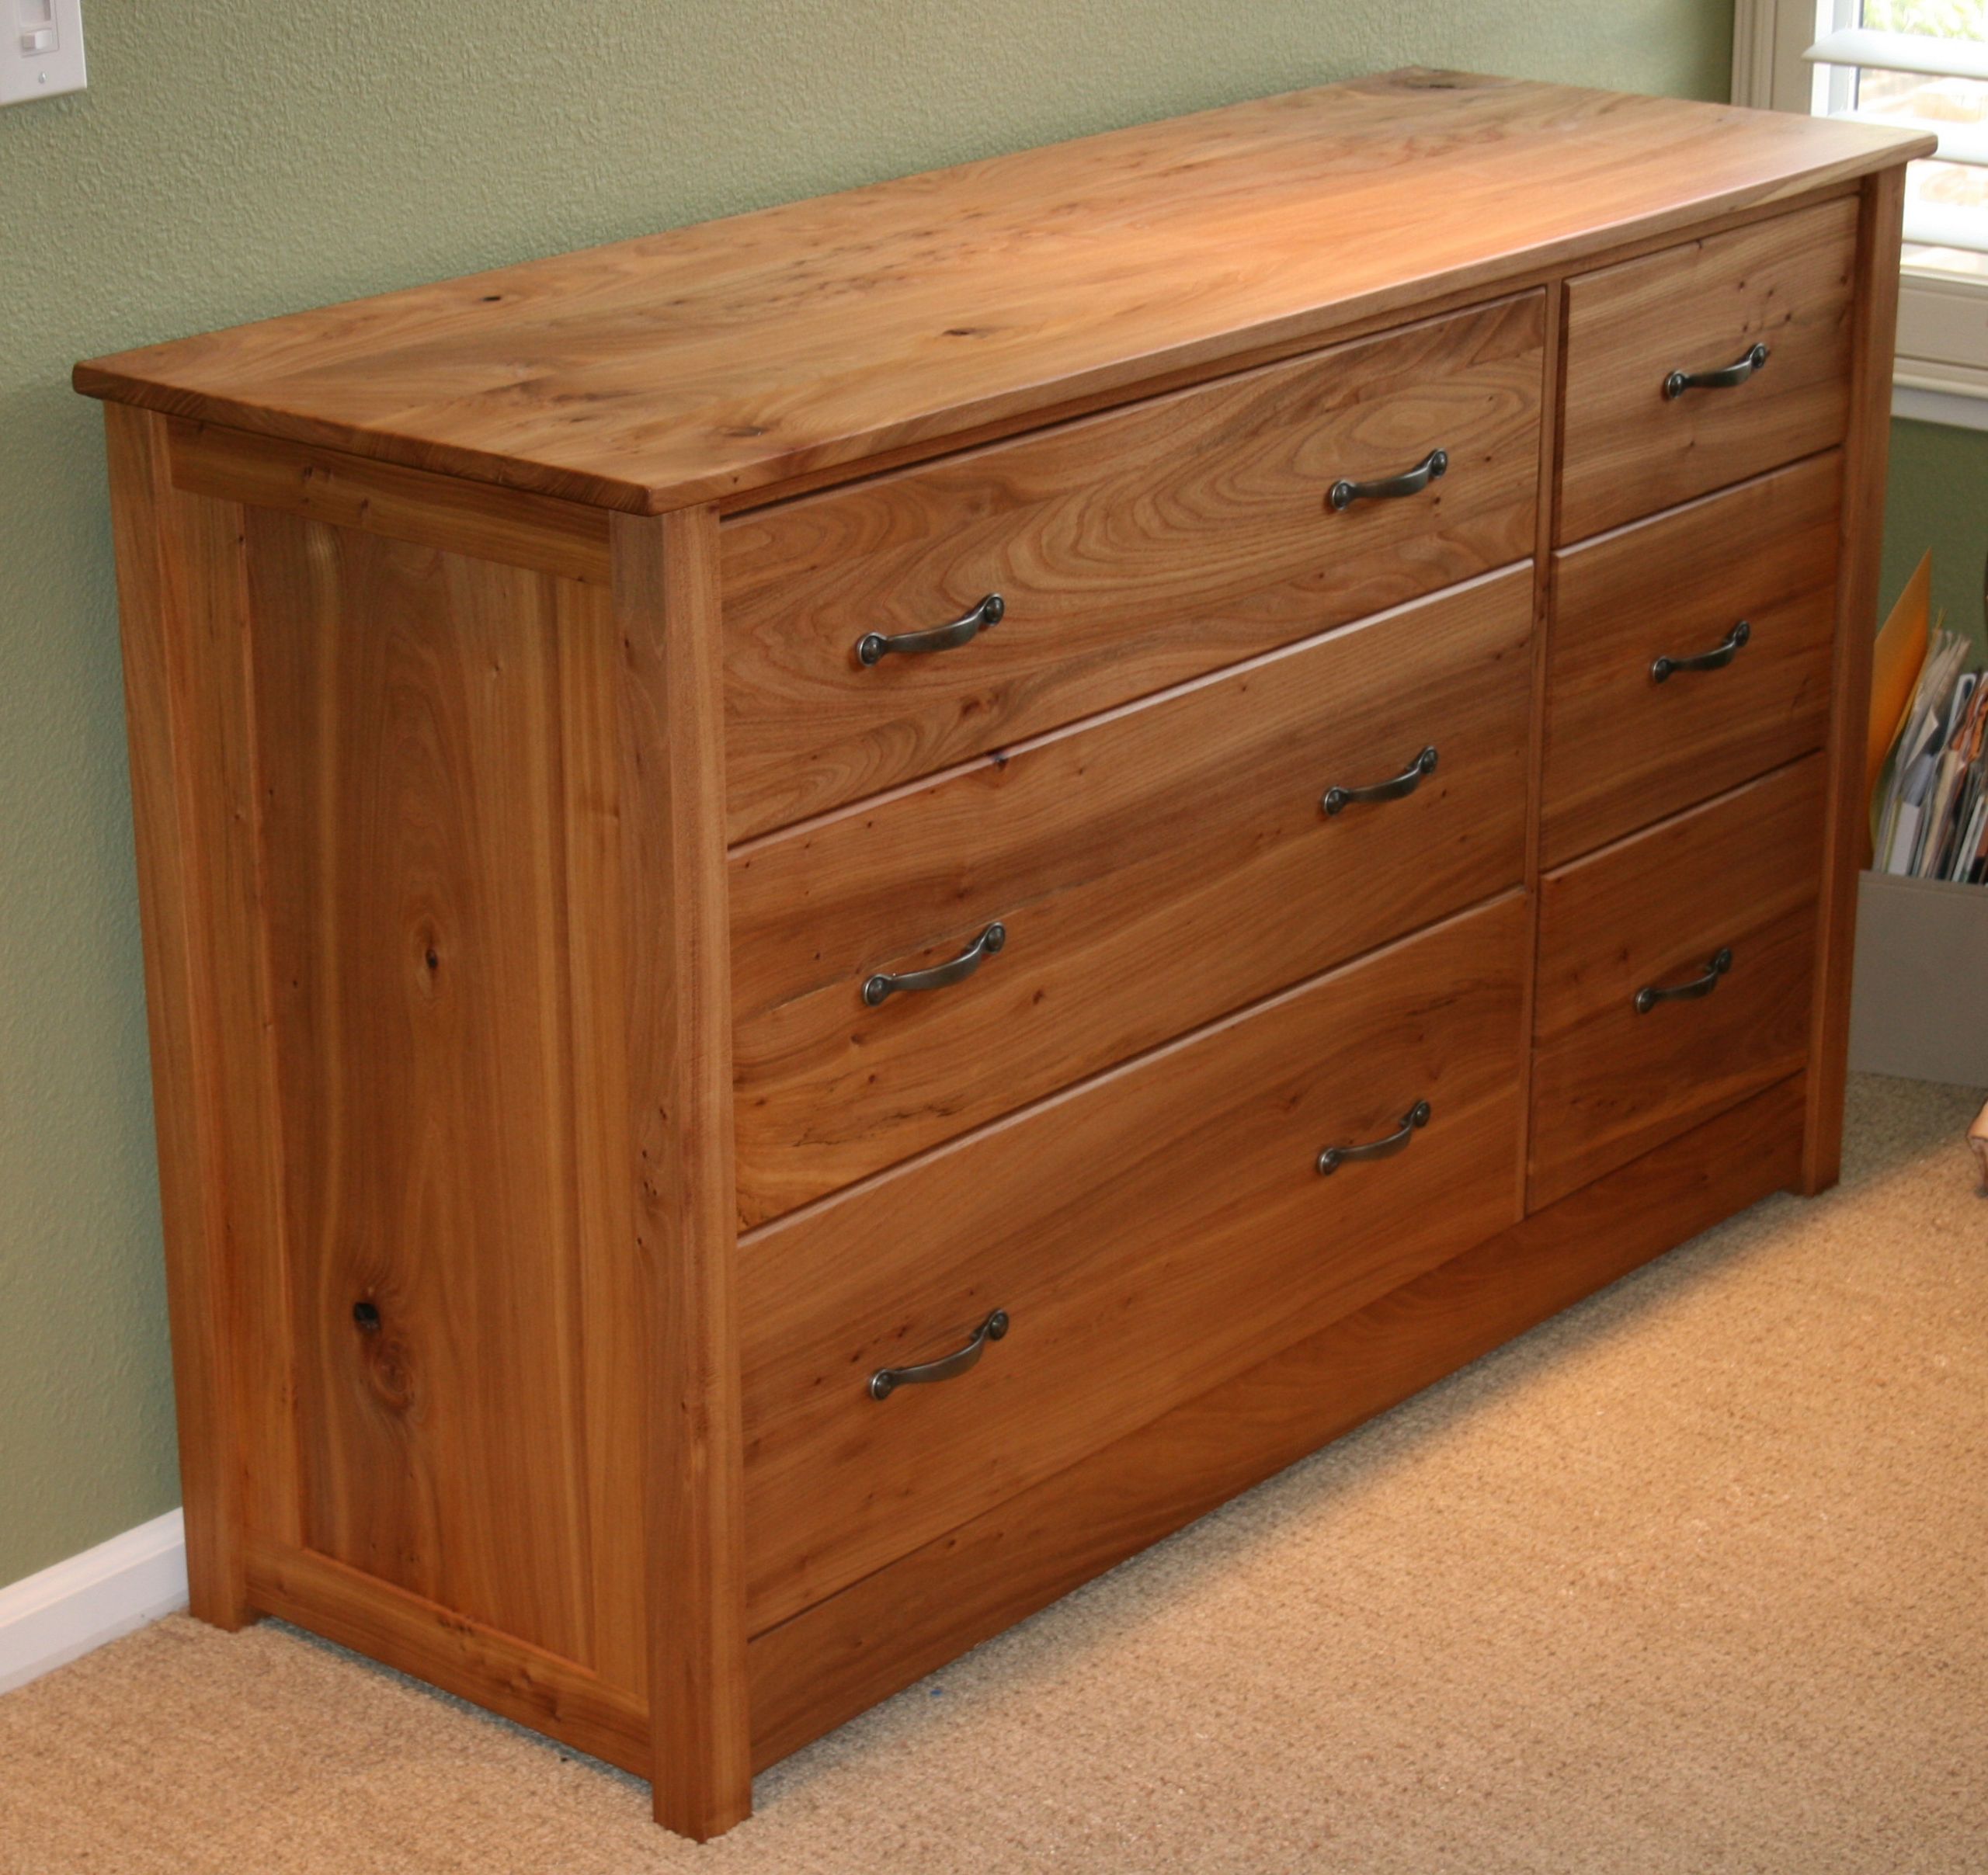 DIY Chest Of Drawers Plans
 DIY Chest Drawers Plans Woodworking PDF Download wall